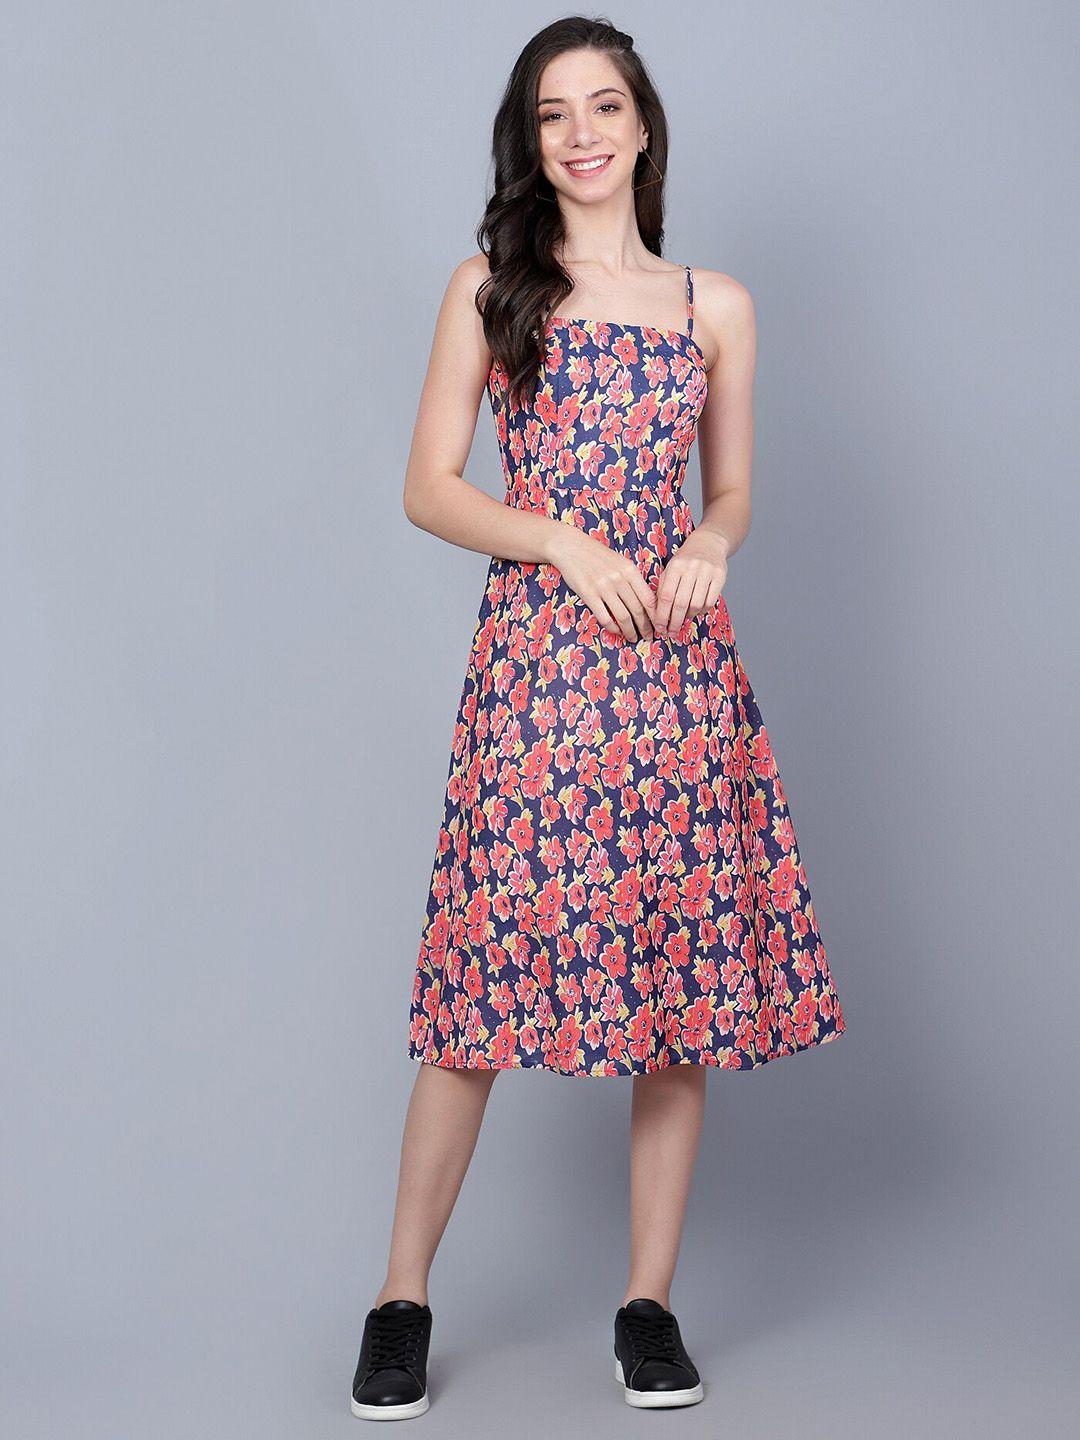 mast & harbour navy blue floral printed fit & flare midi dress